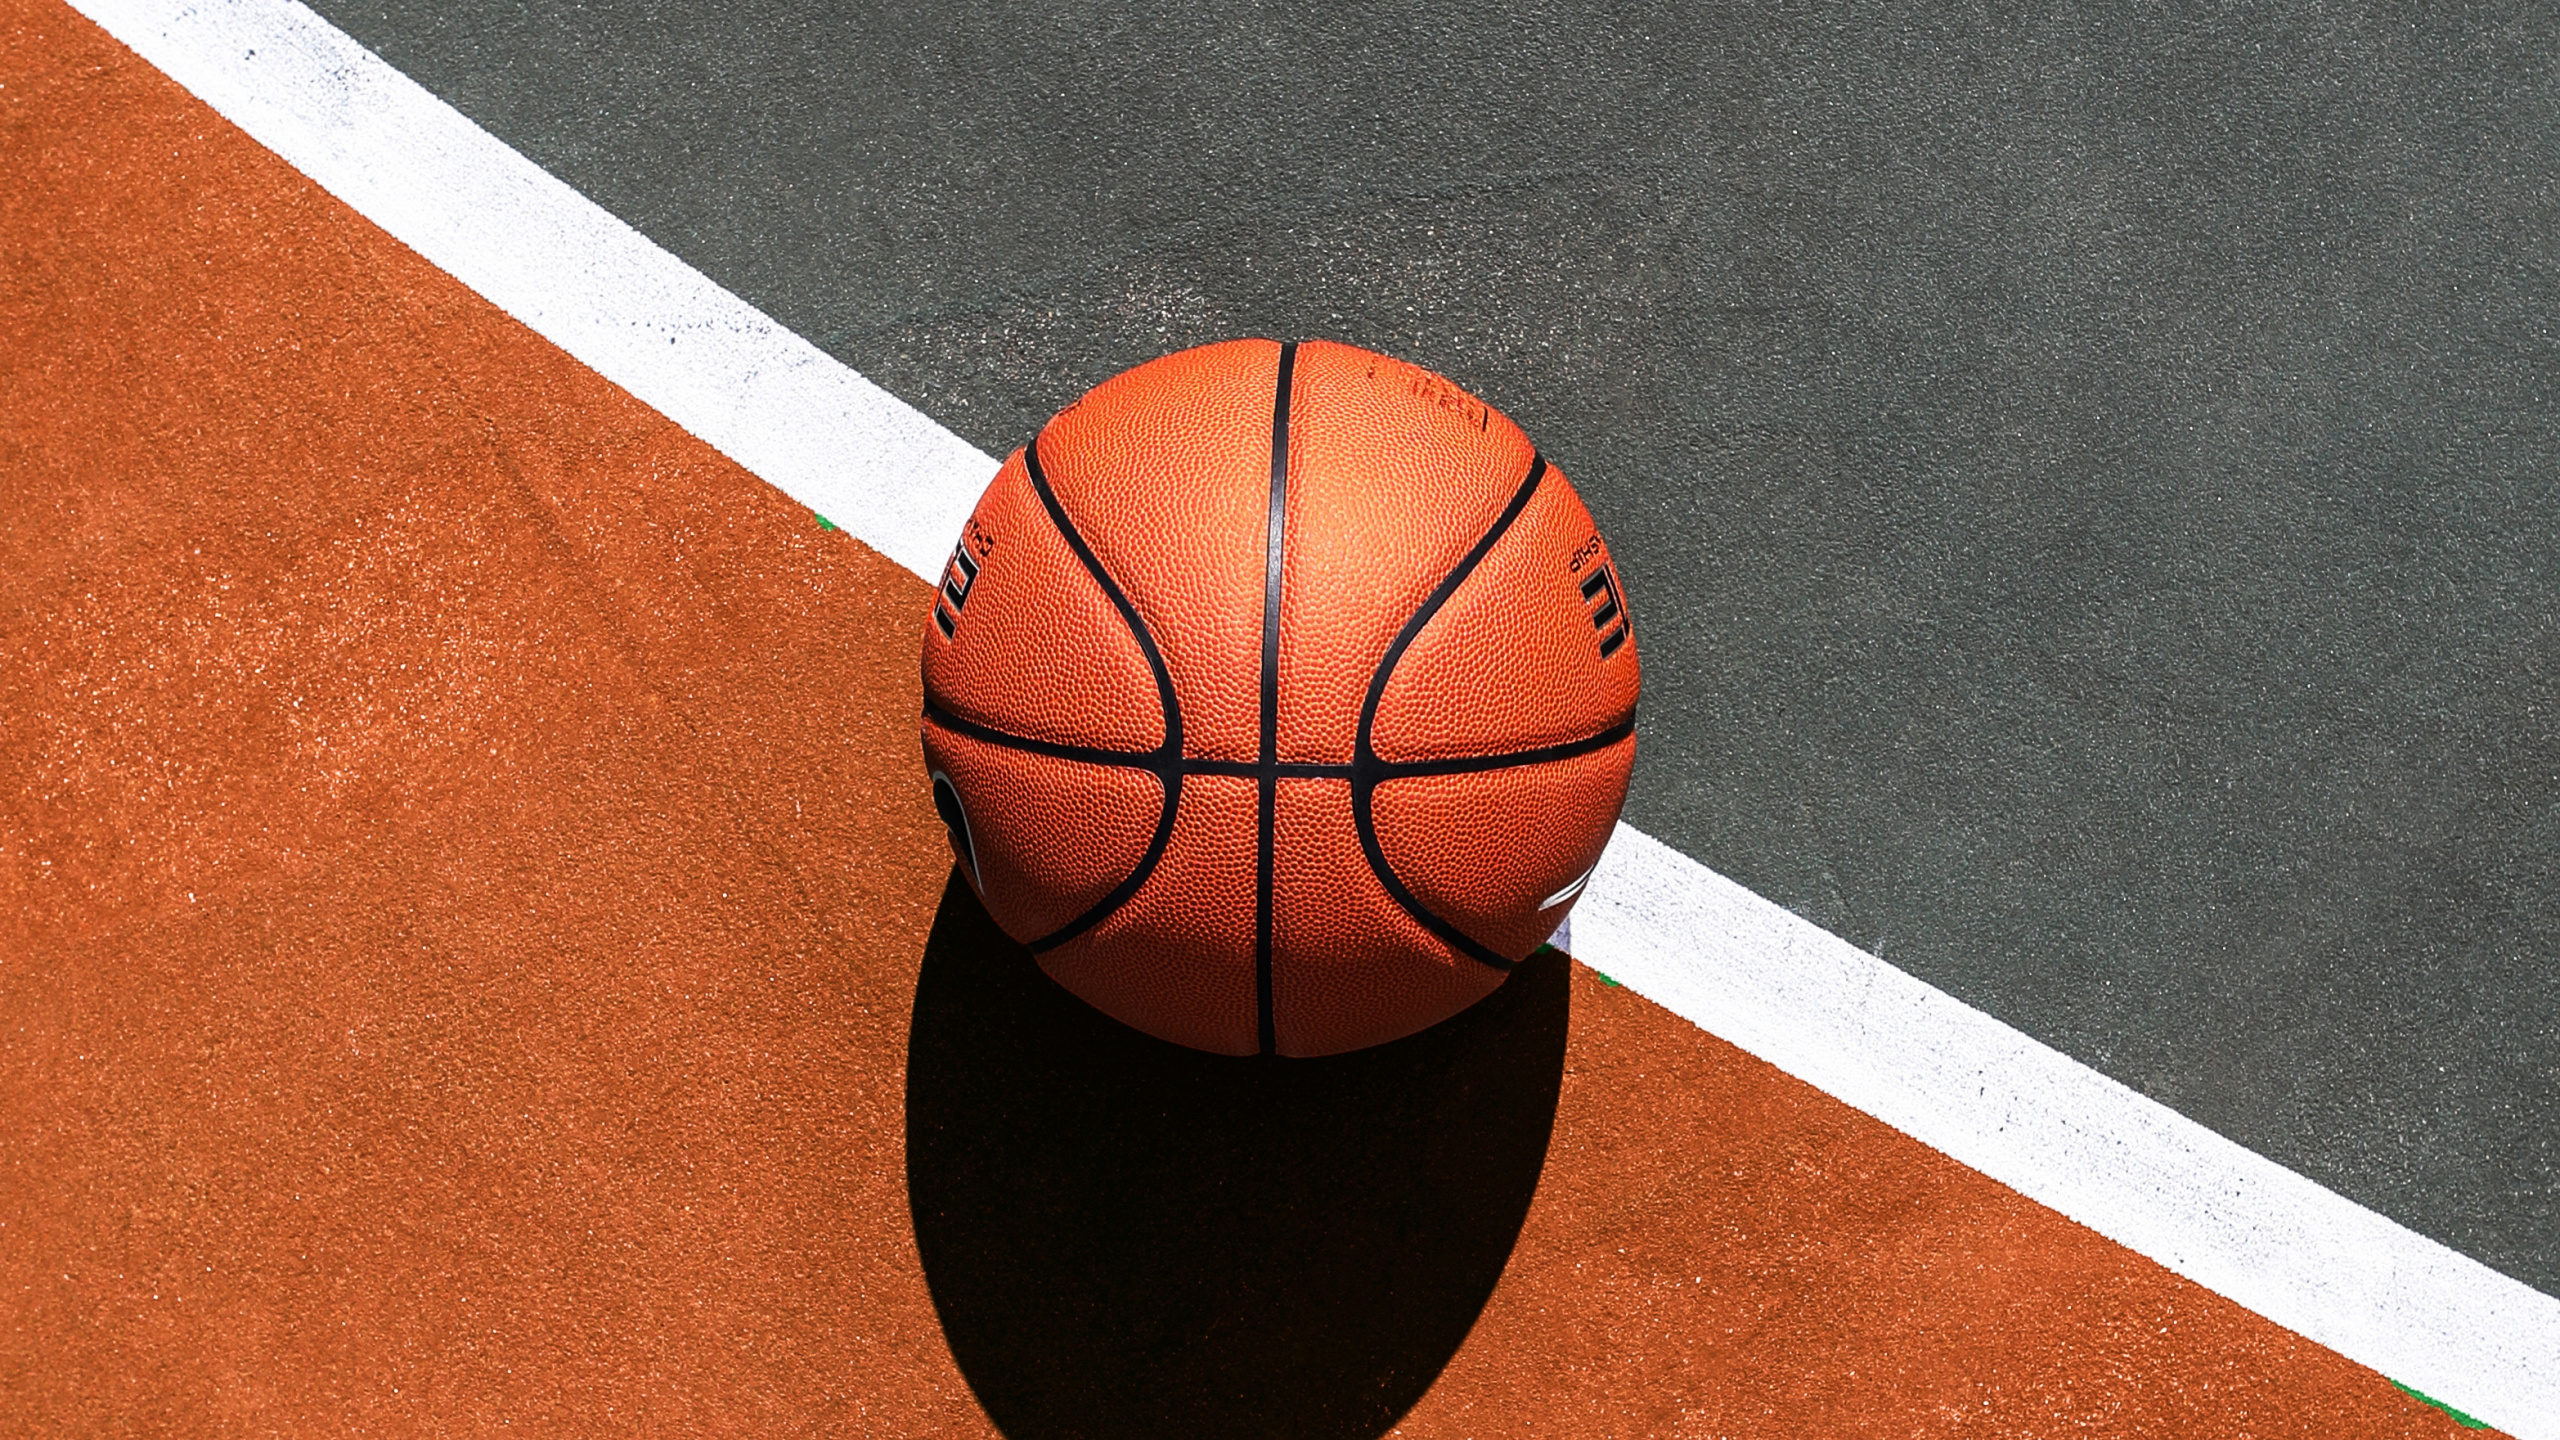 Basketball on Blue and White Basketball Court. Wallpaper in 2560x1440 Resolution